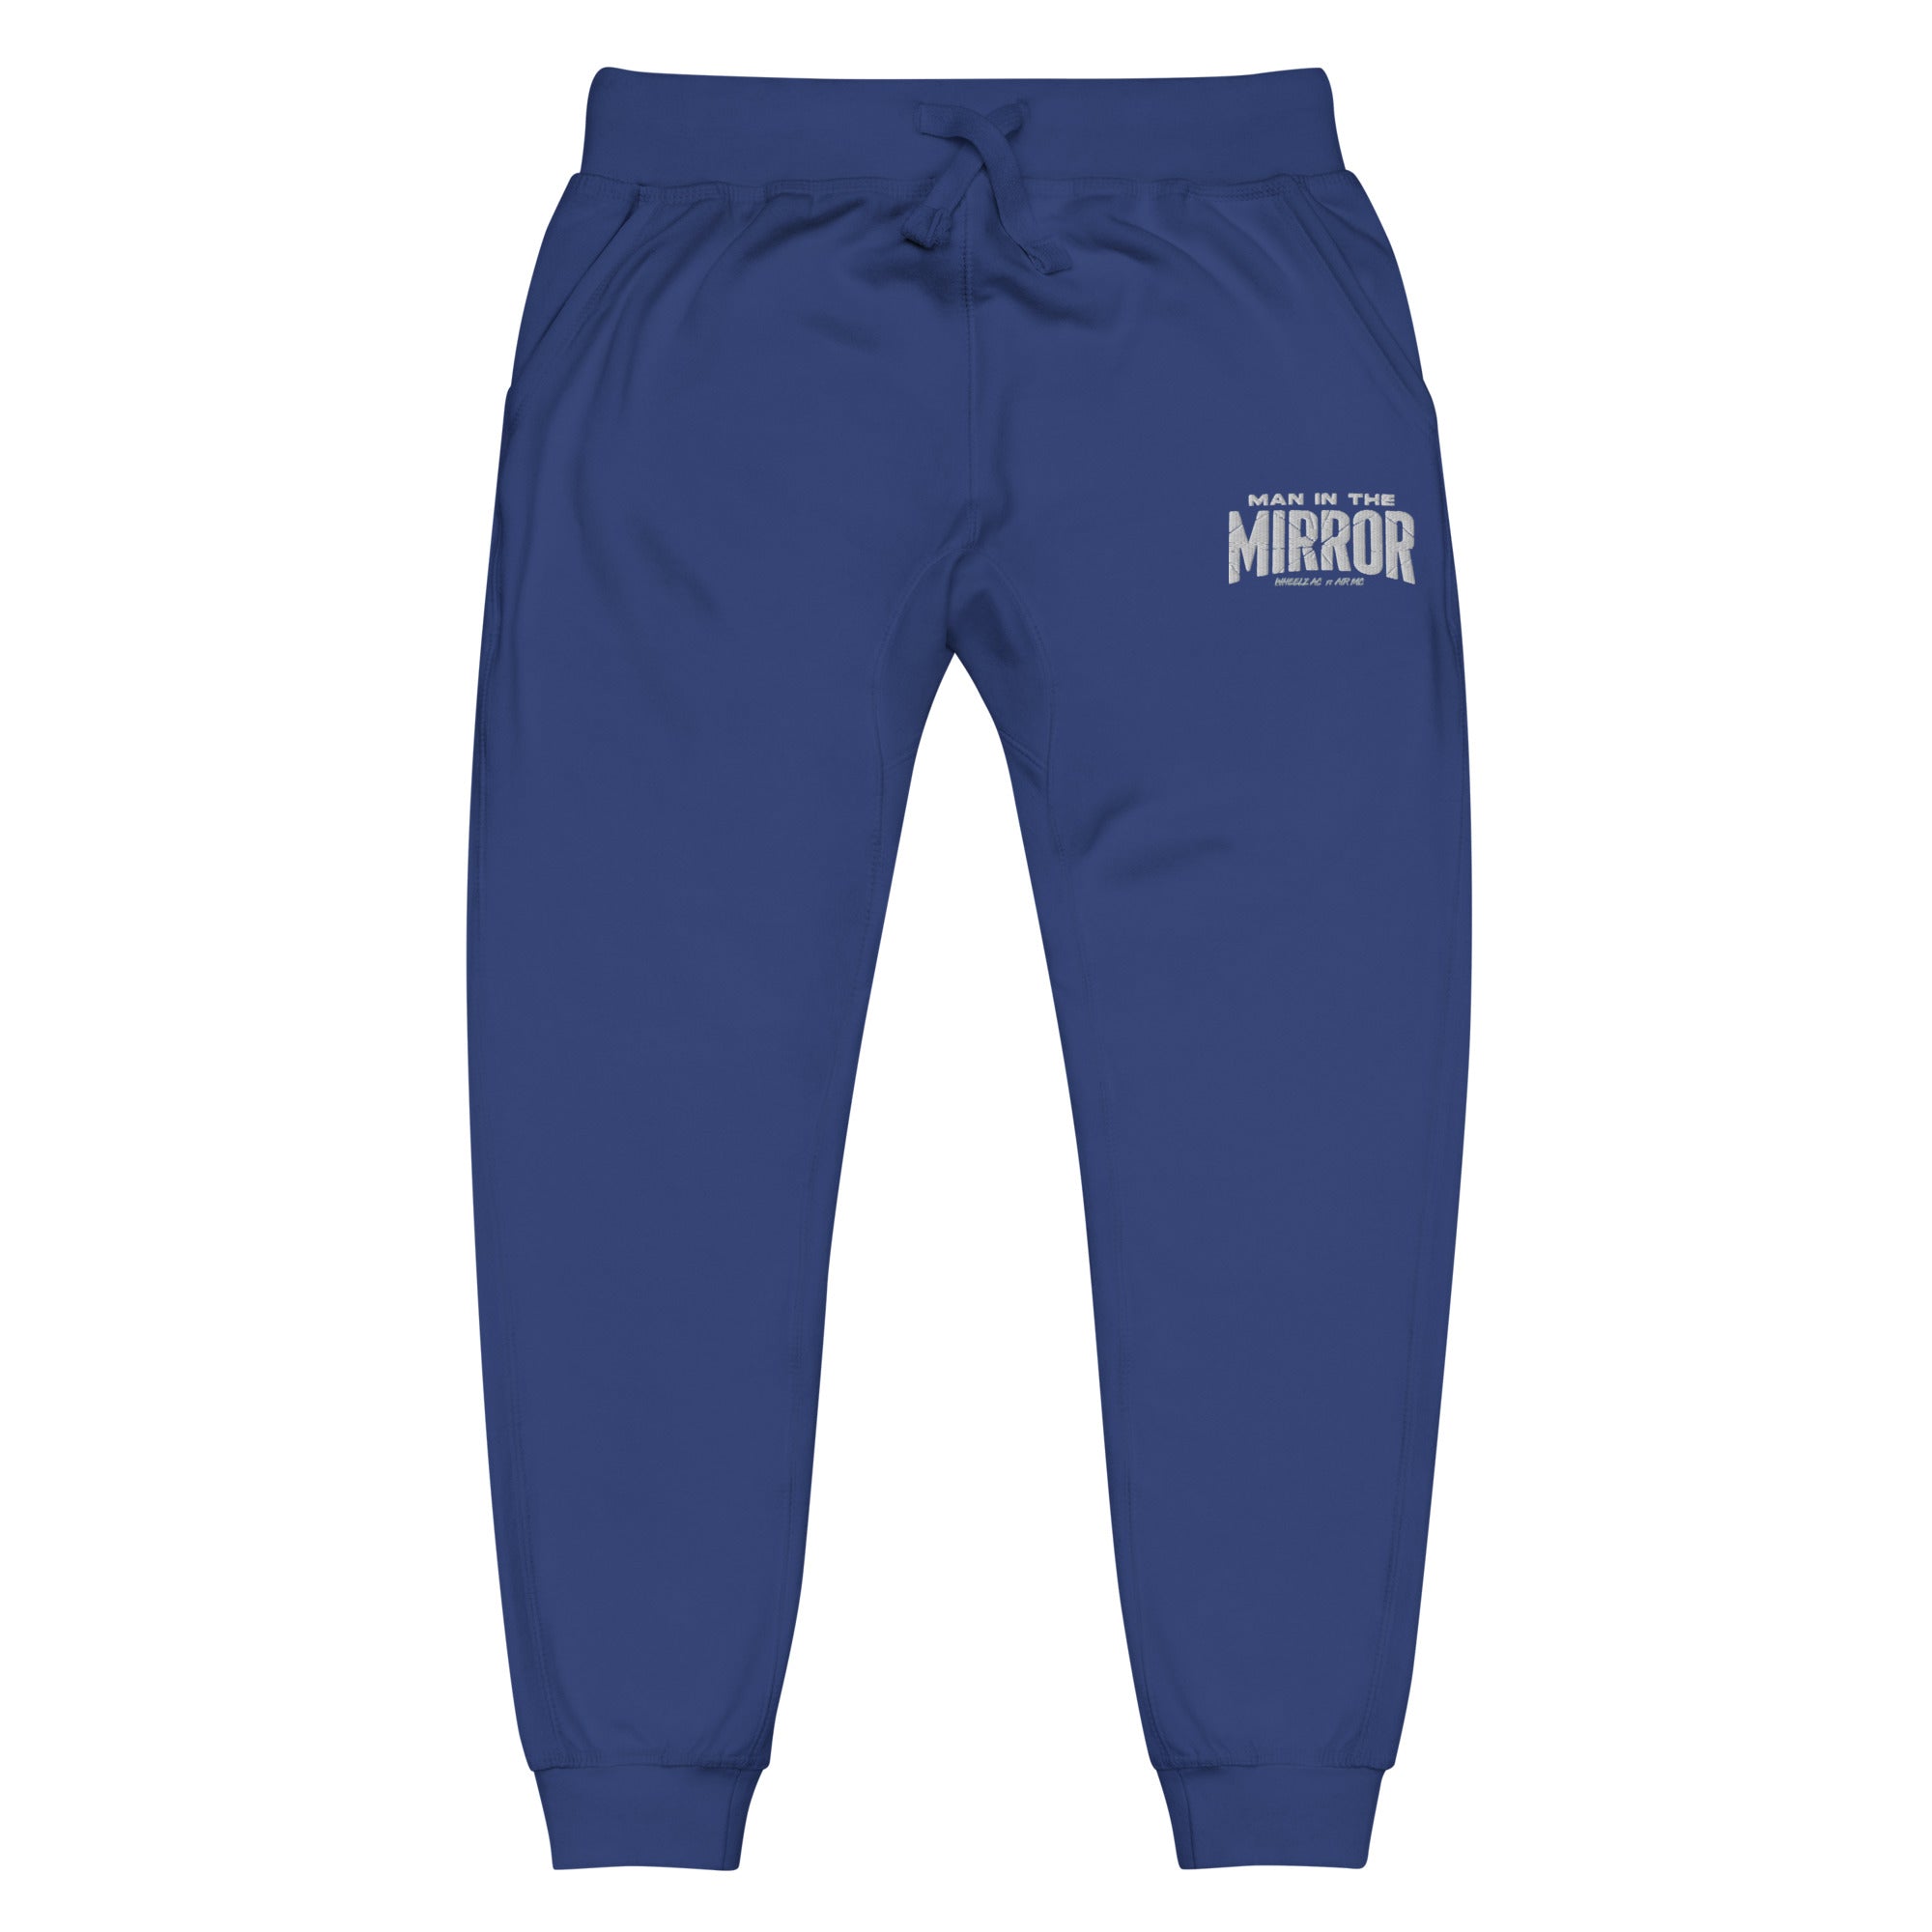 Man in the Mirror Embroidered  Fleece Sweatpants